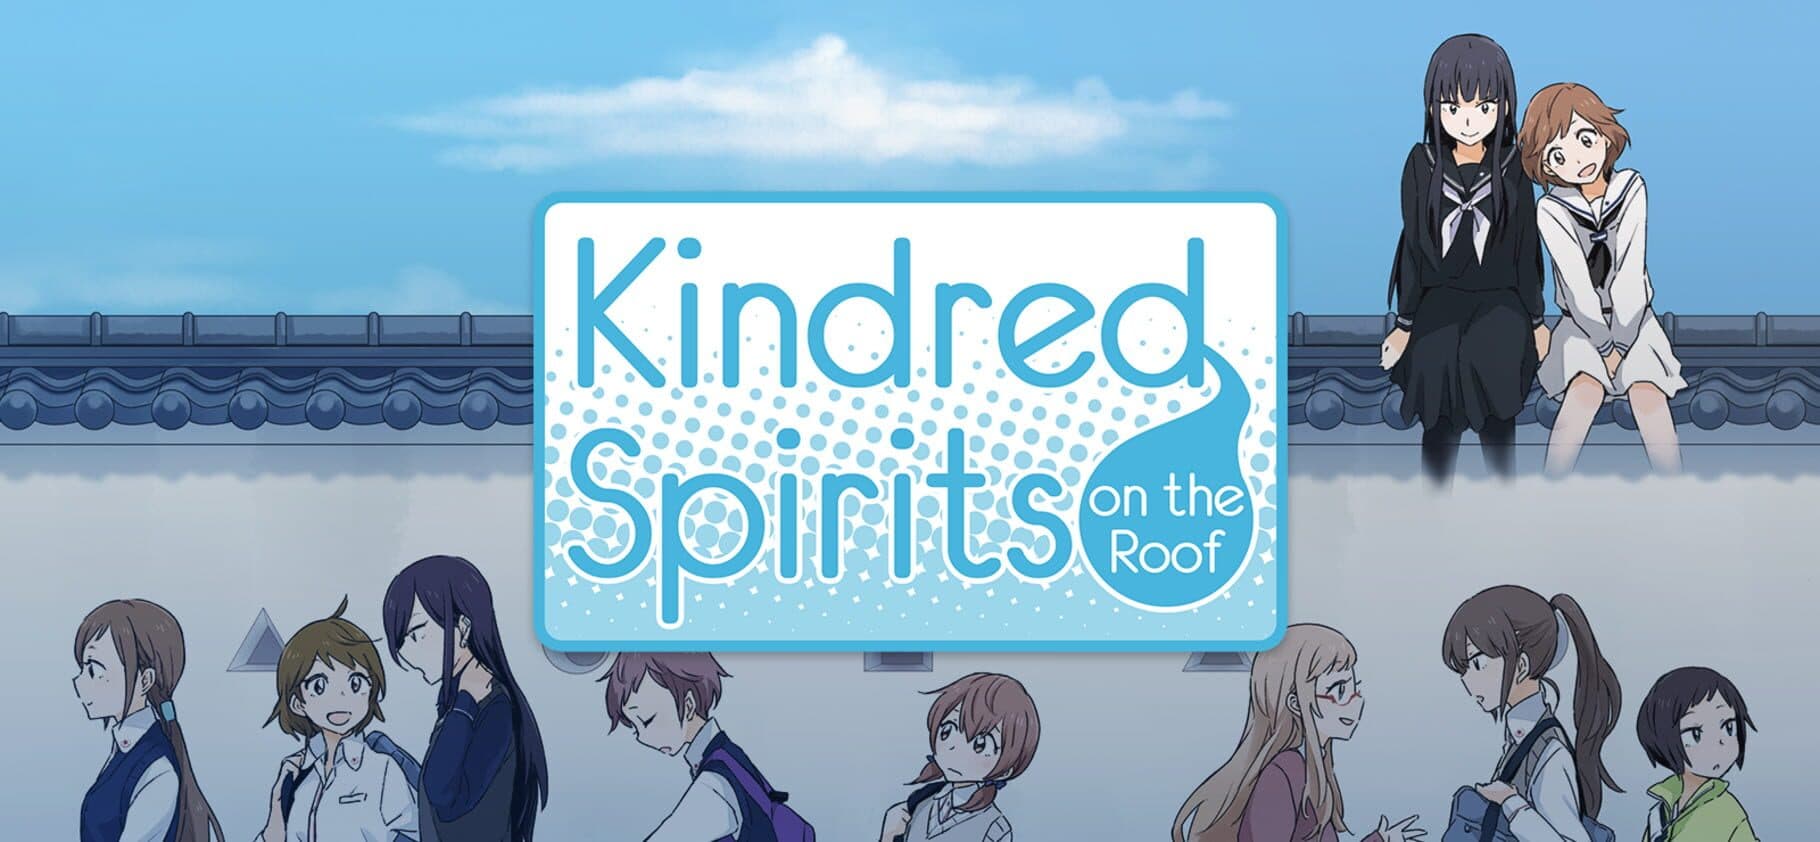 Kindred Spirits on the Roof Image